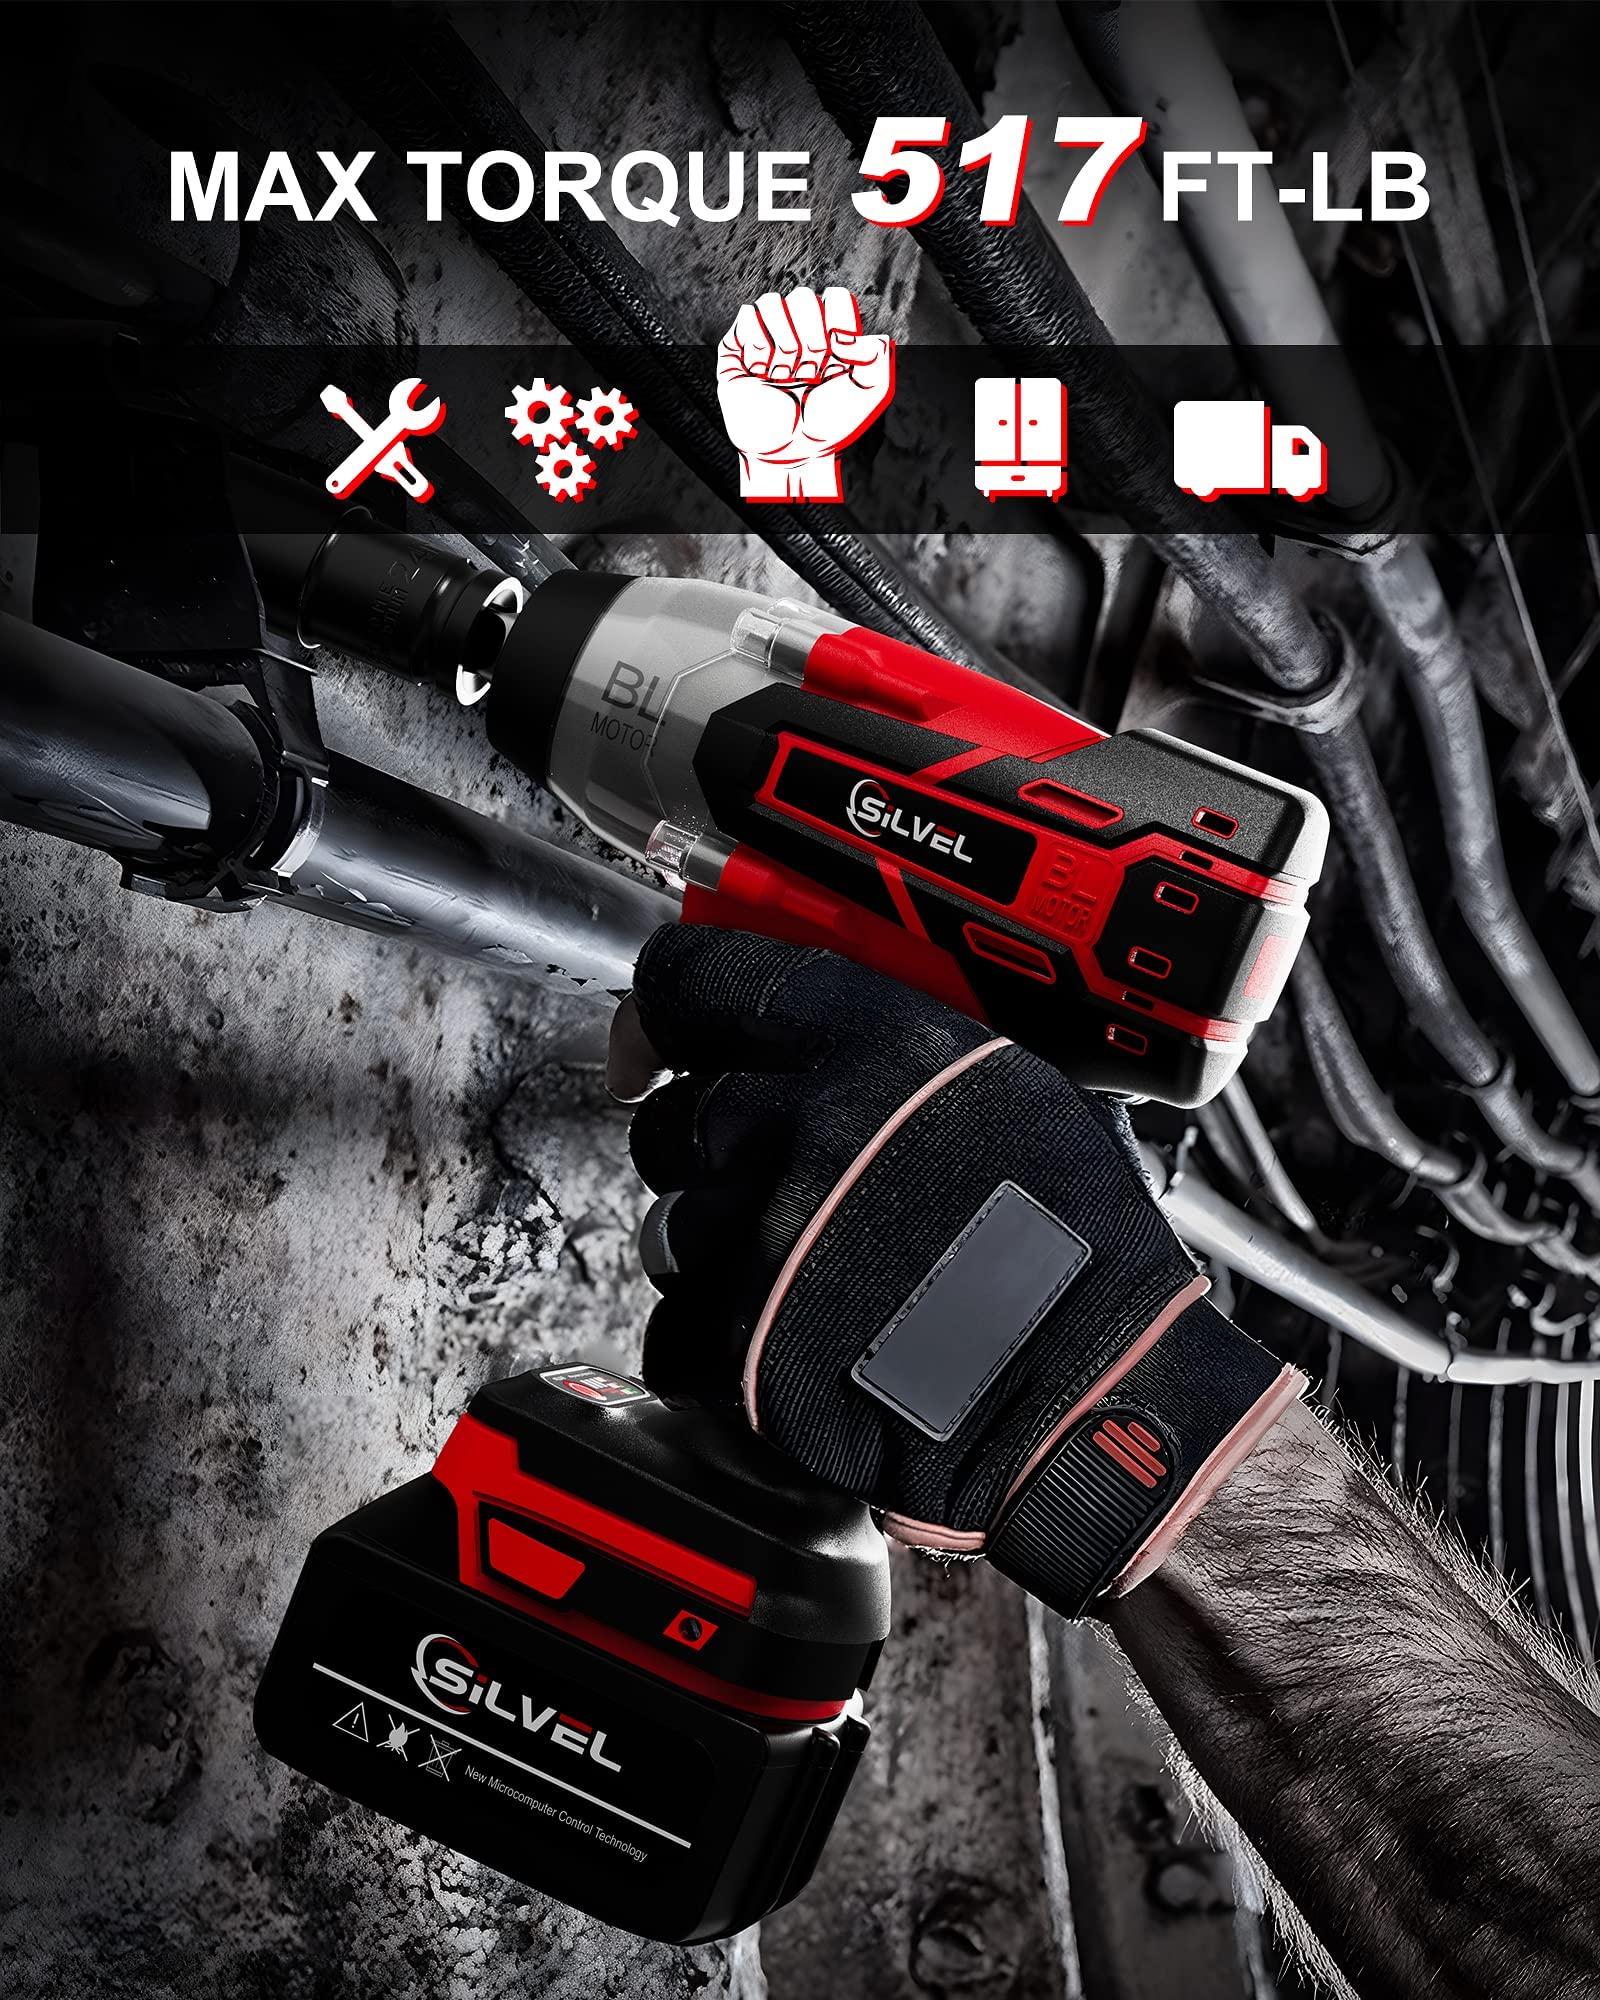 SILVEL 21V Cordless Impact Wrench 1/2 inch, 517 Ft-lbs (700N.m) Max Torque, Brushless Impact Driver with 1.5Ah Li-ion Battery, 6 Sockets, Power Impact Gun